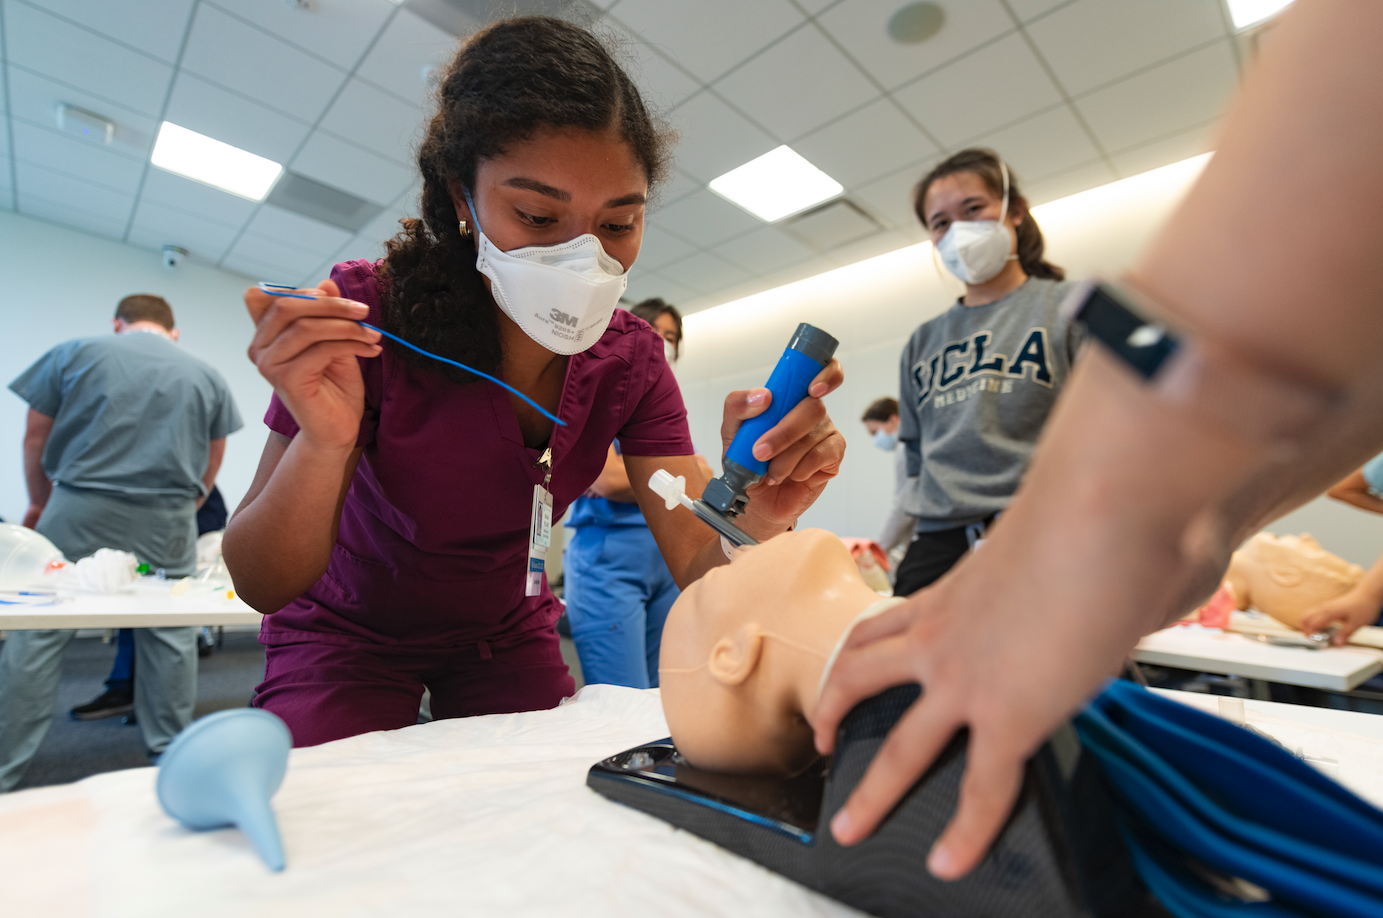 A medical student places a tracheostomy tube during a simulation session.